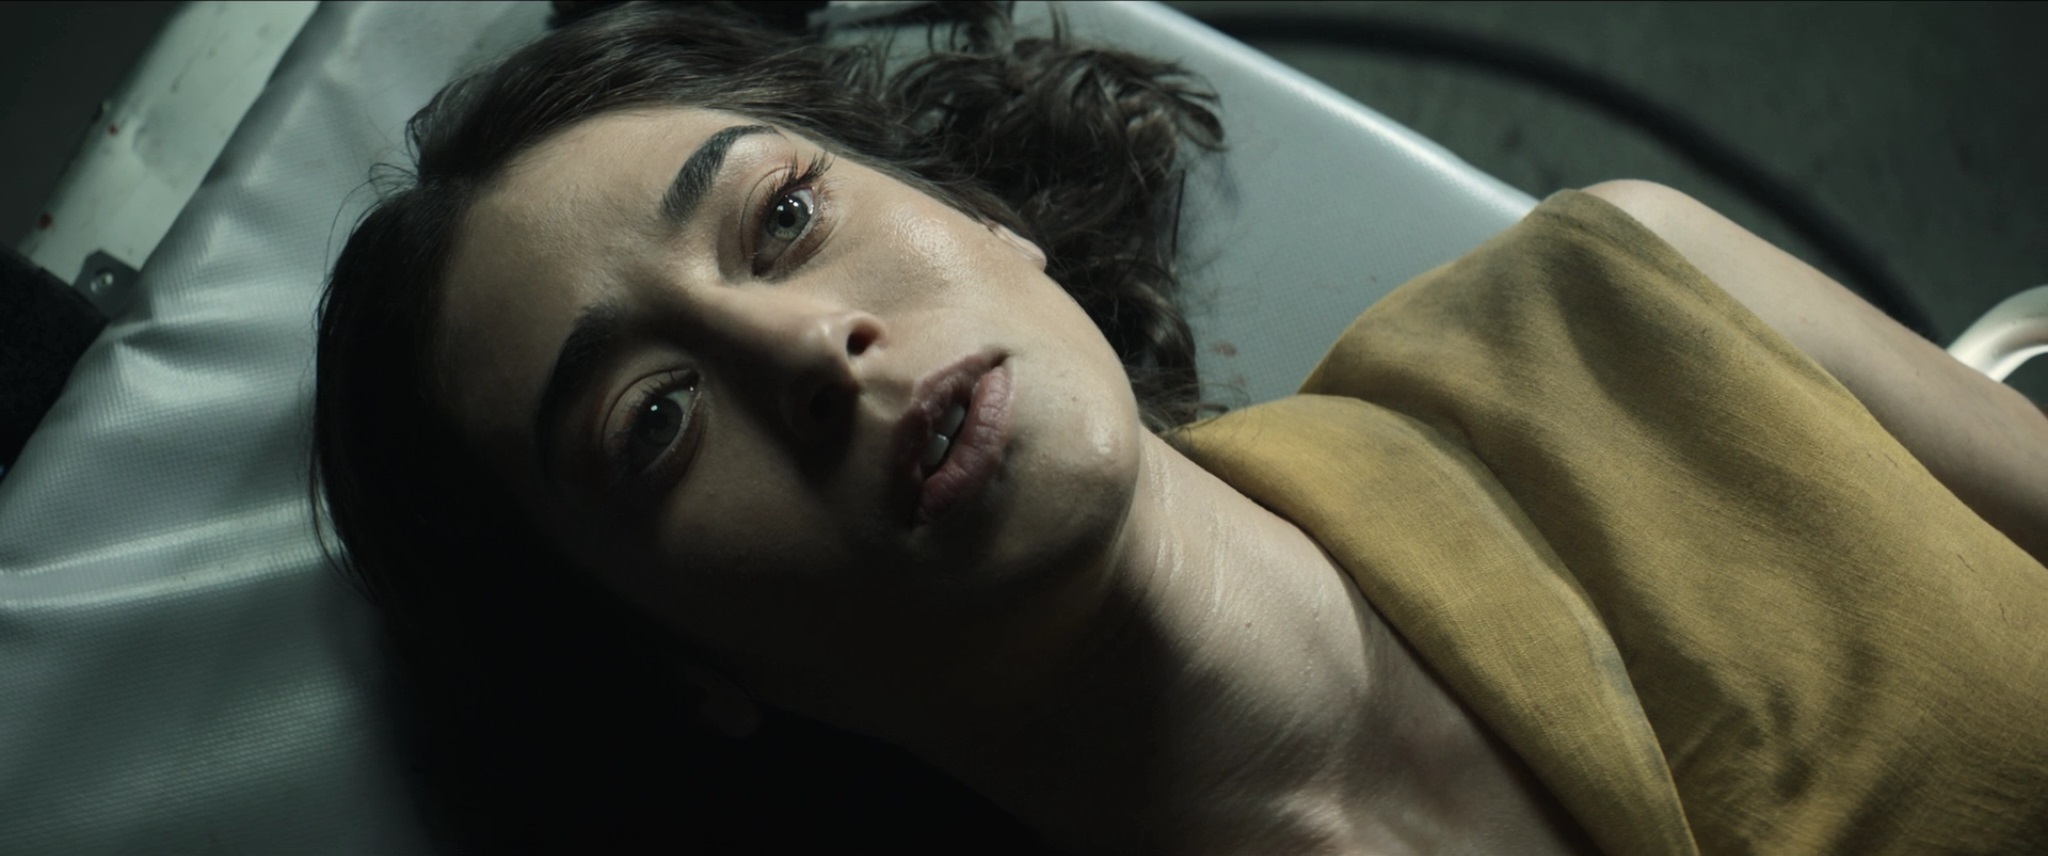 Lizzy Caplan never makes it through an alien invasion unscathed